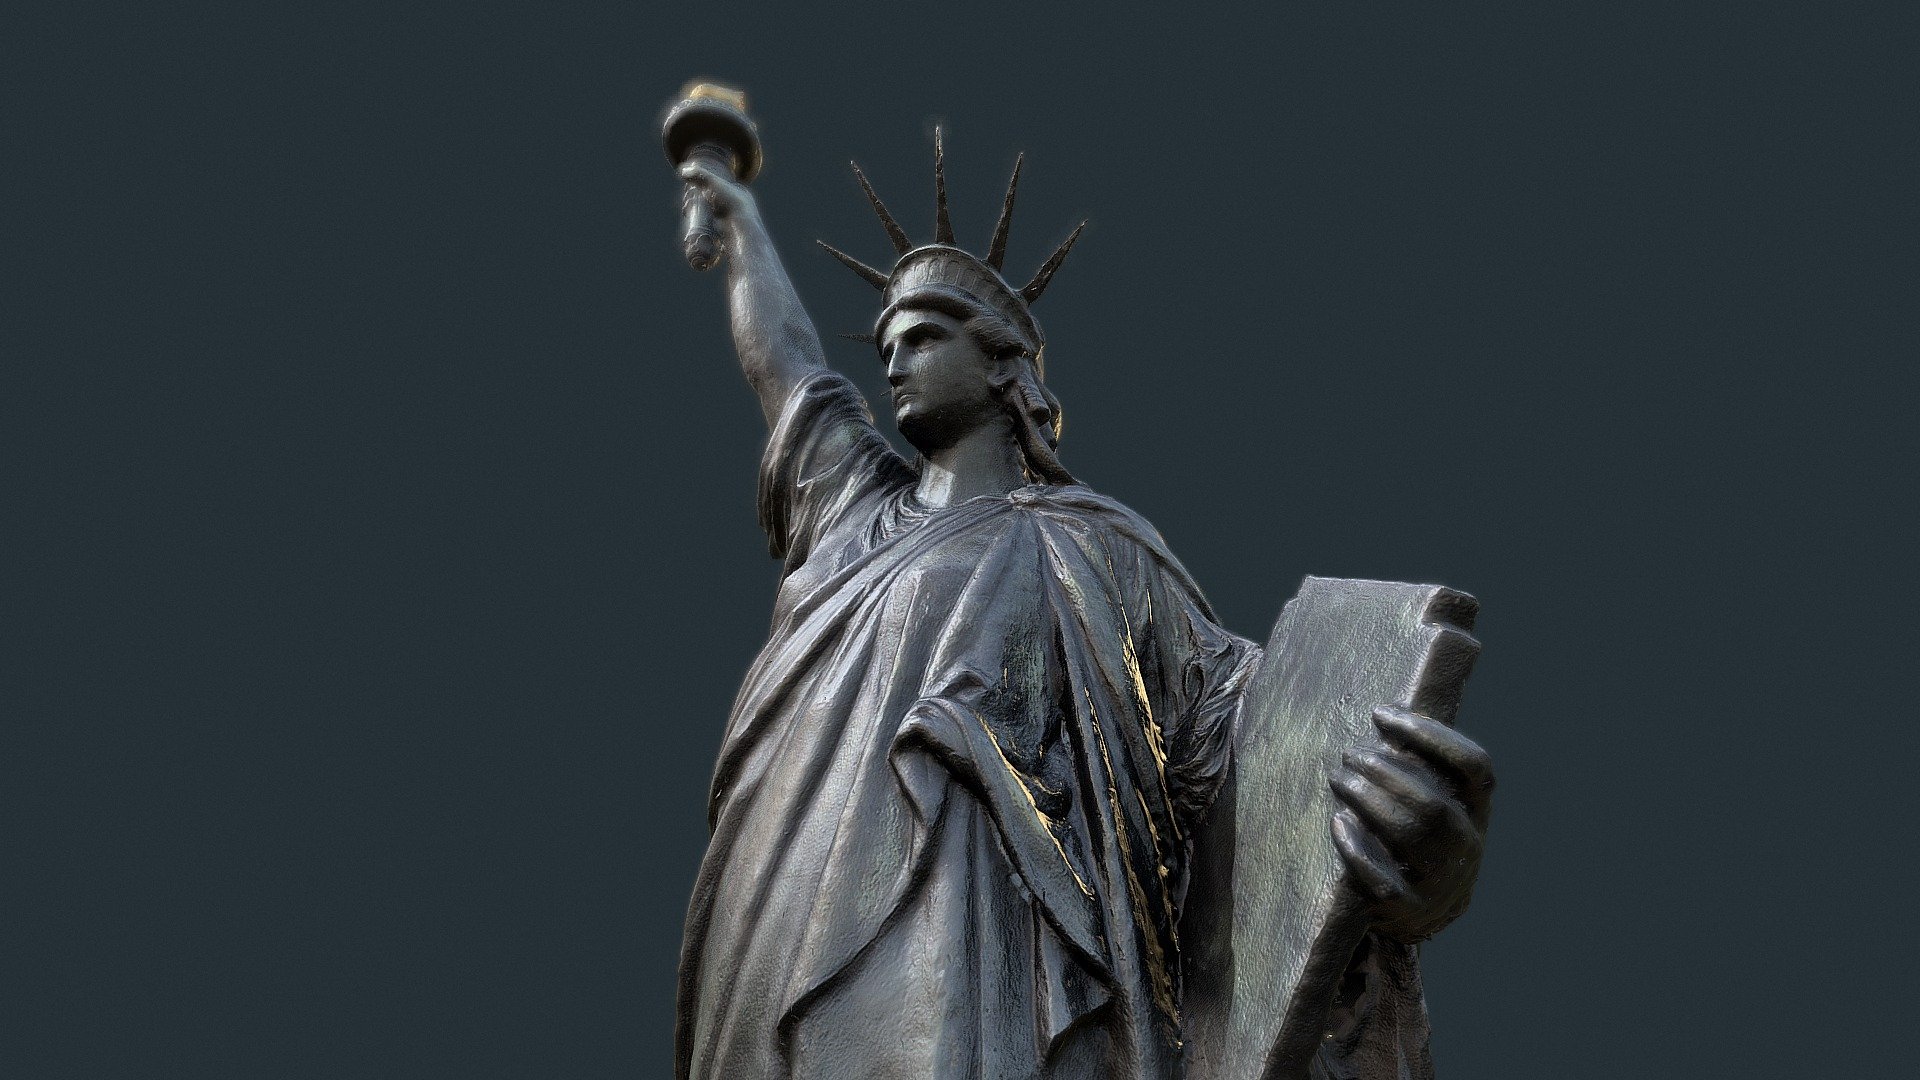 The Statue of Liberty, designed by Frédéric Auguste Bartholdi.

This replica is located at the Musée des Arts et Métiers in Paris. The statue is almost 3 meters tall and it was quite difficult to take pictures from above 3d model